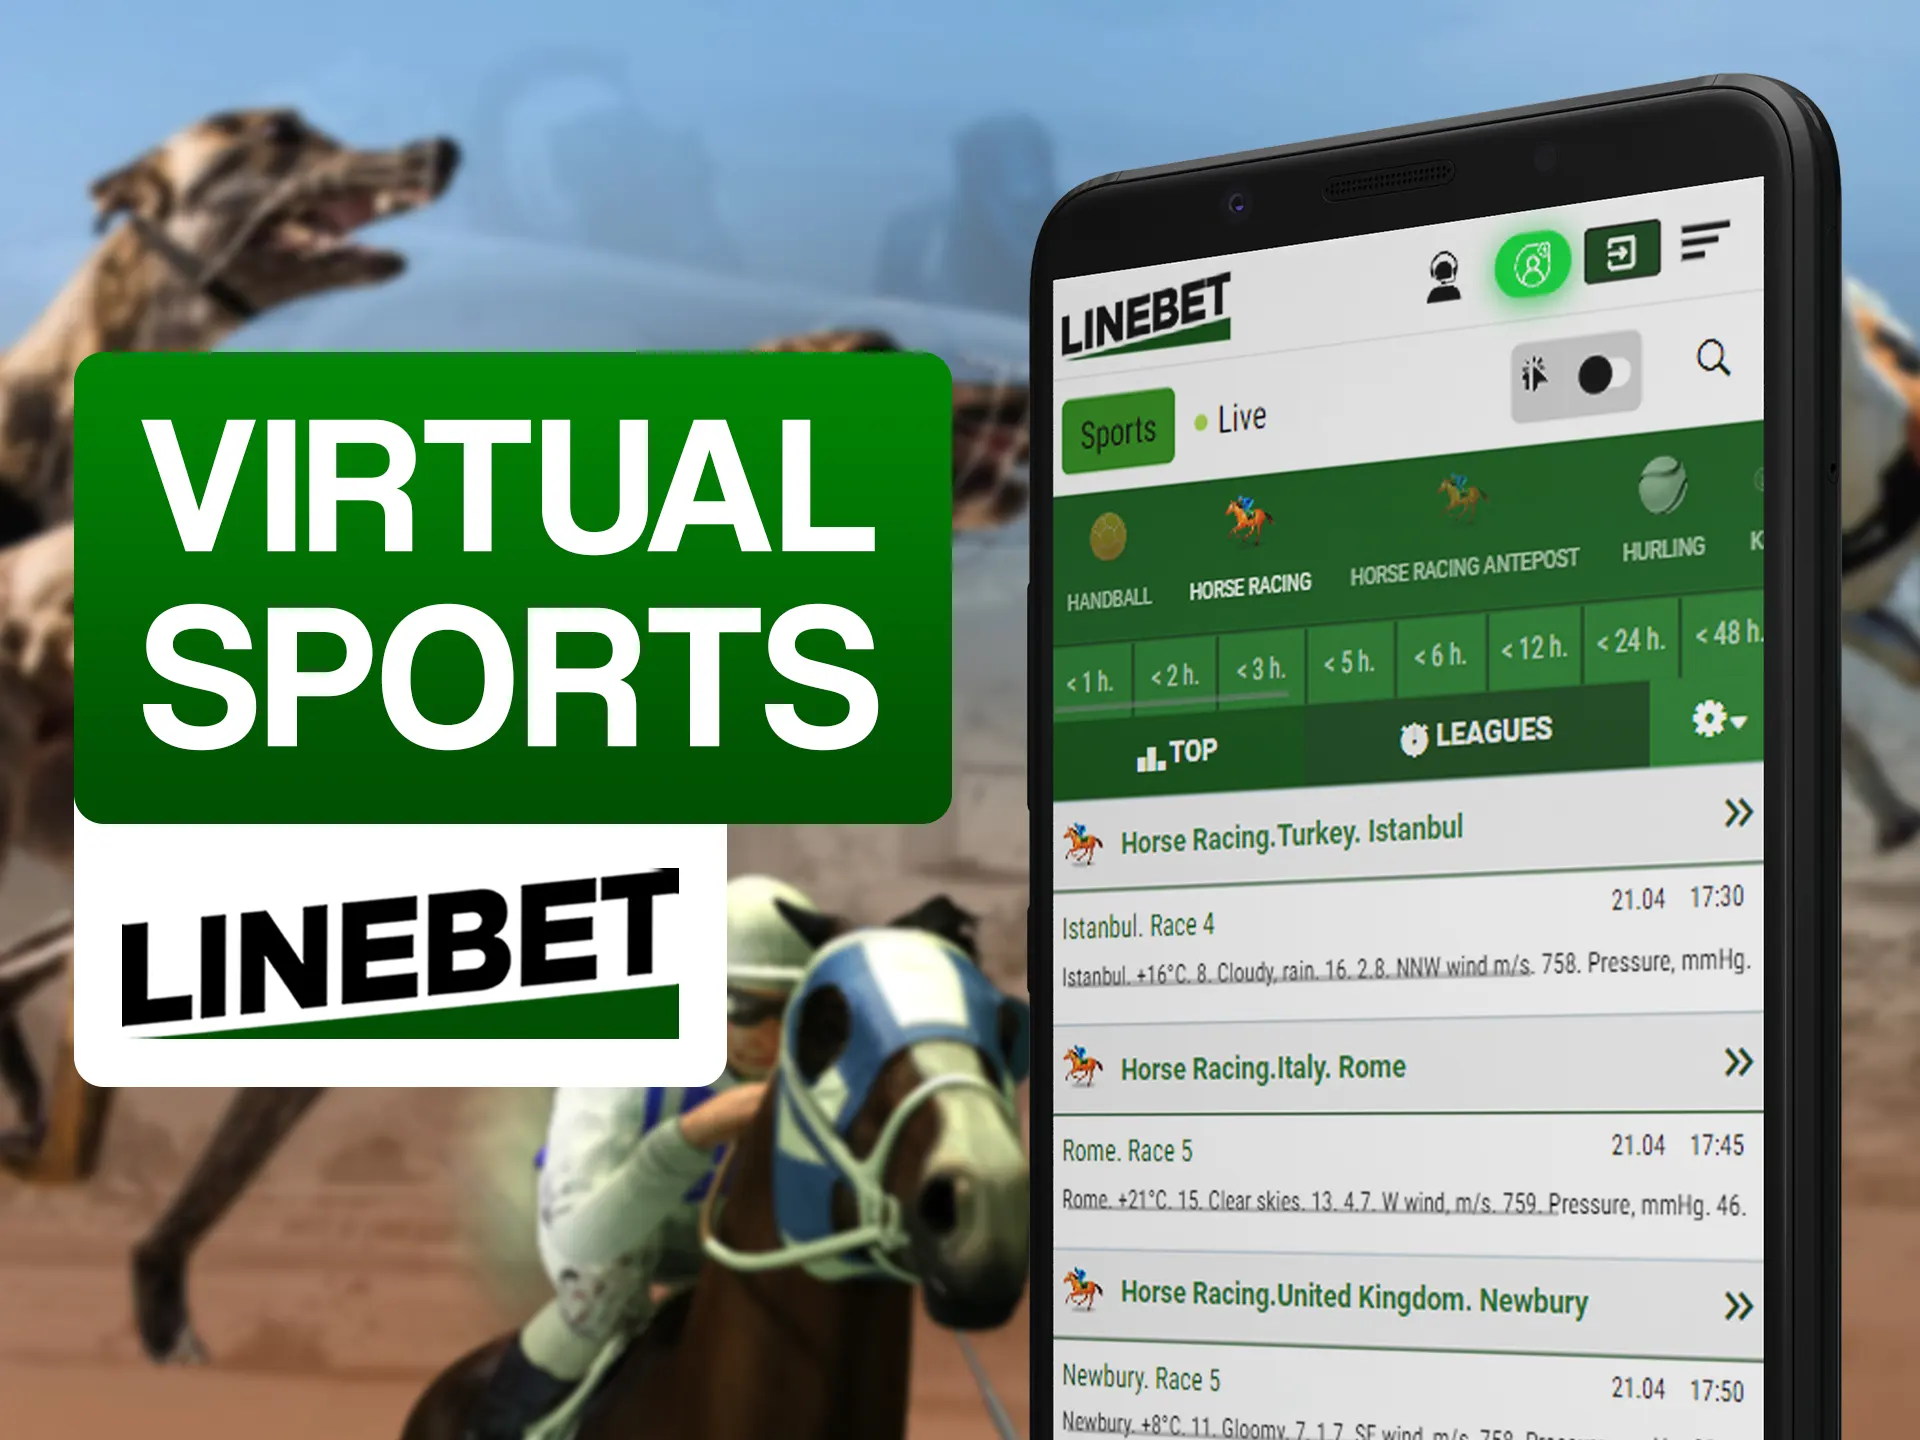 Bet on most intresting of virtual sports in Linebet app.